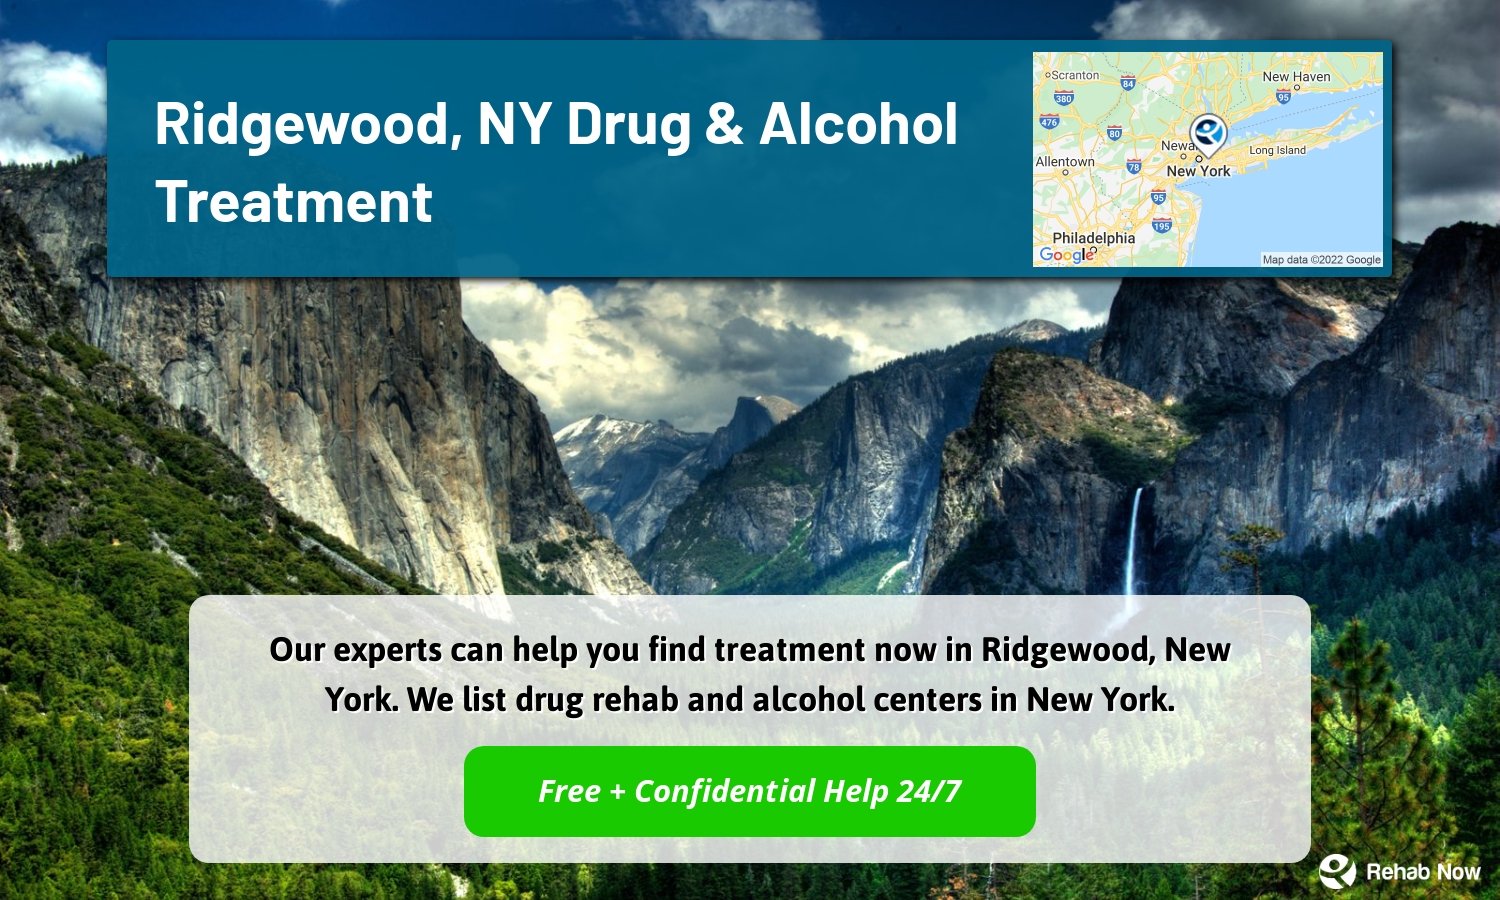 Our experts can help you find treatment now in Ridgewood, New York. We list drug rehab and alcohol centers in New York.